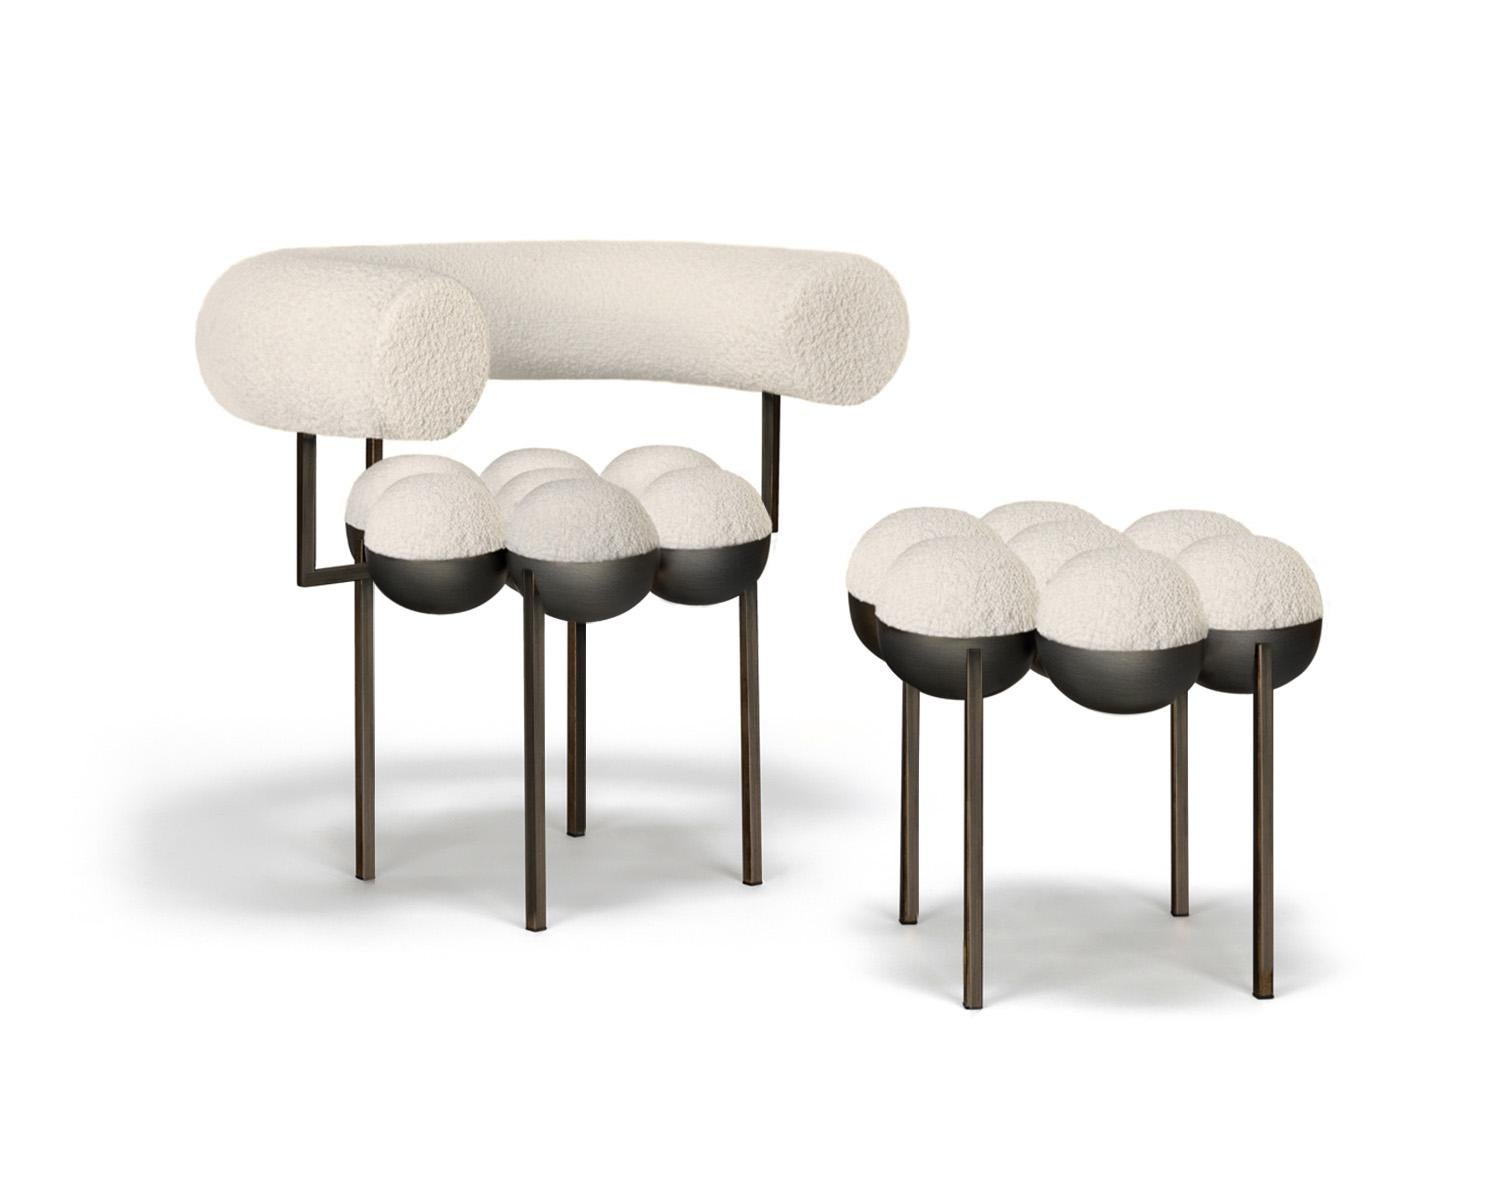 Portuguese Saturn Chair Bronze Oxidized Steel and Cream Boucle Wool by Lara Bohinc in Stock For Sale